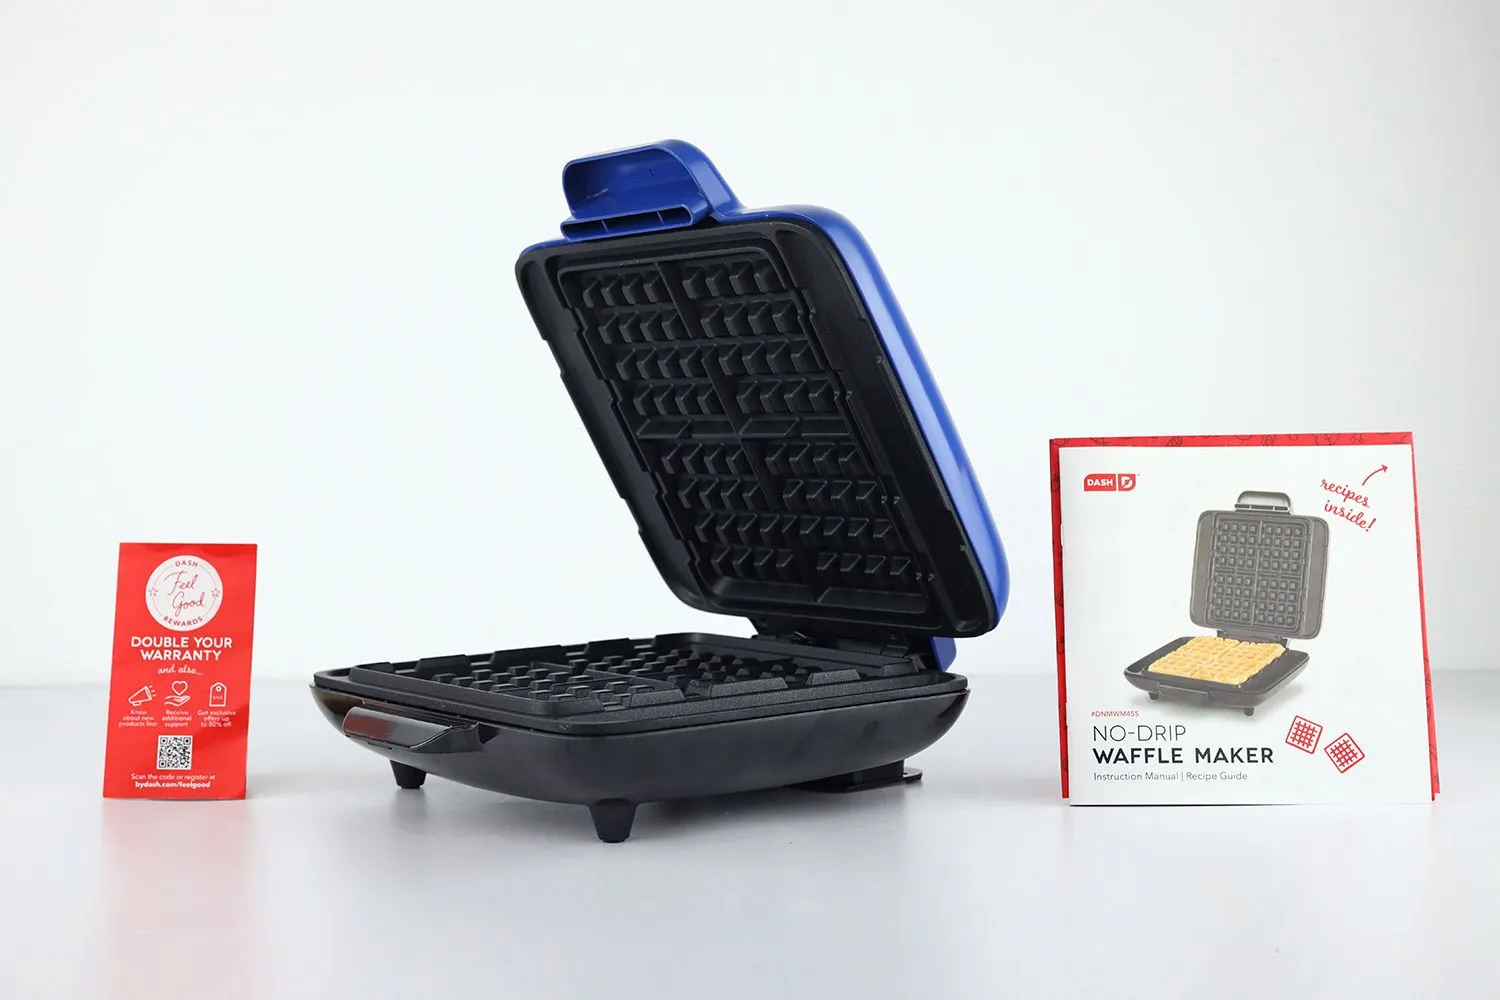 https://cdn.healthykitchen101.com/reviews/images/waffle-makers/cl75ssf1z0007o3880yl8c21i.jpg